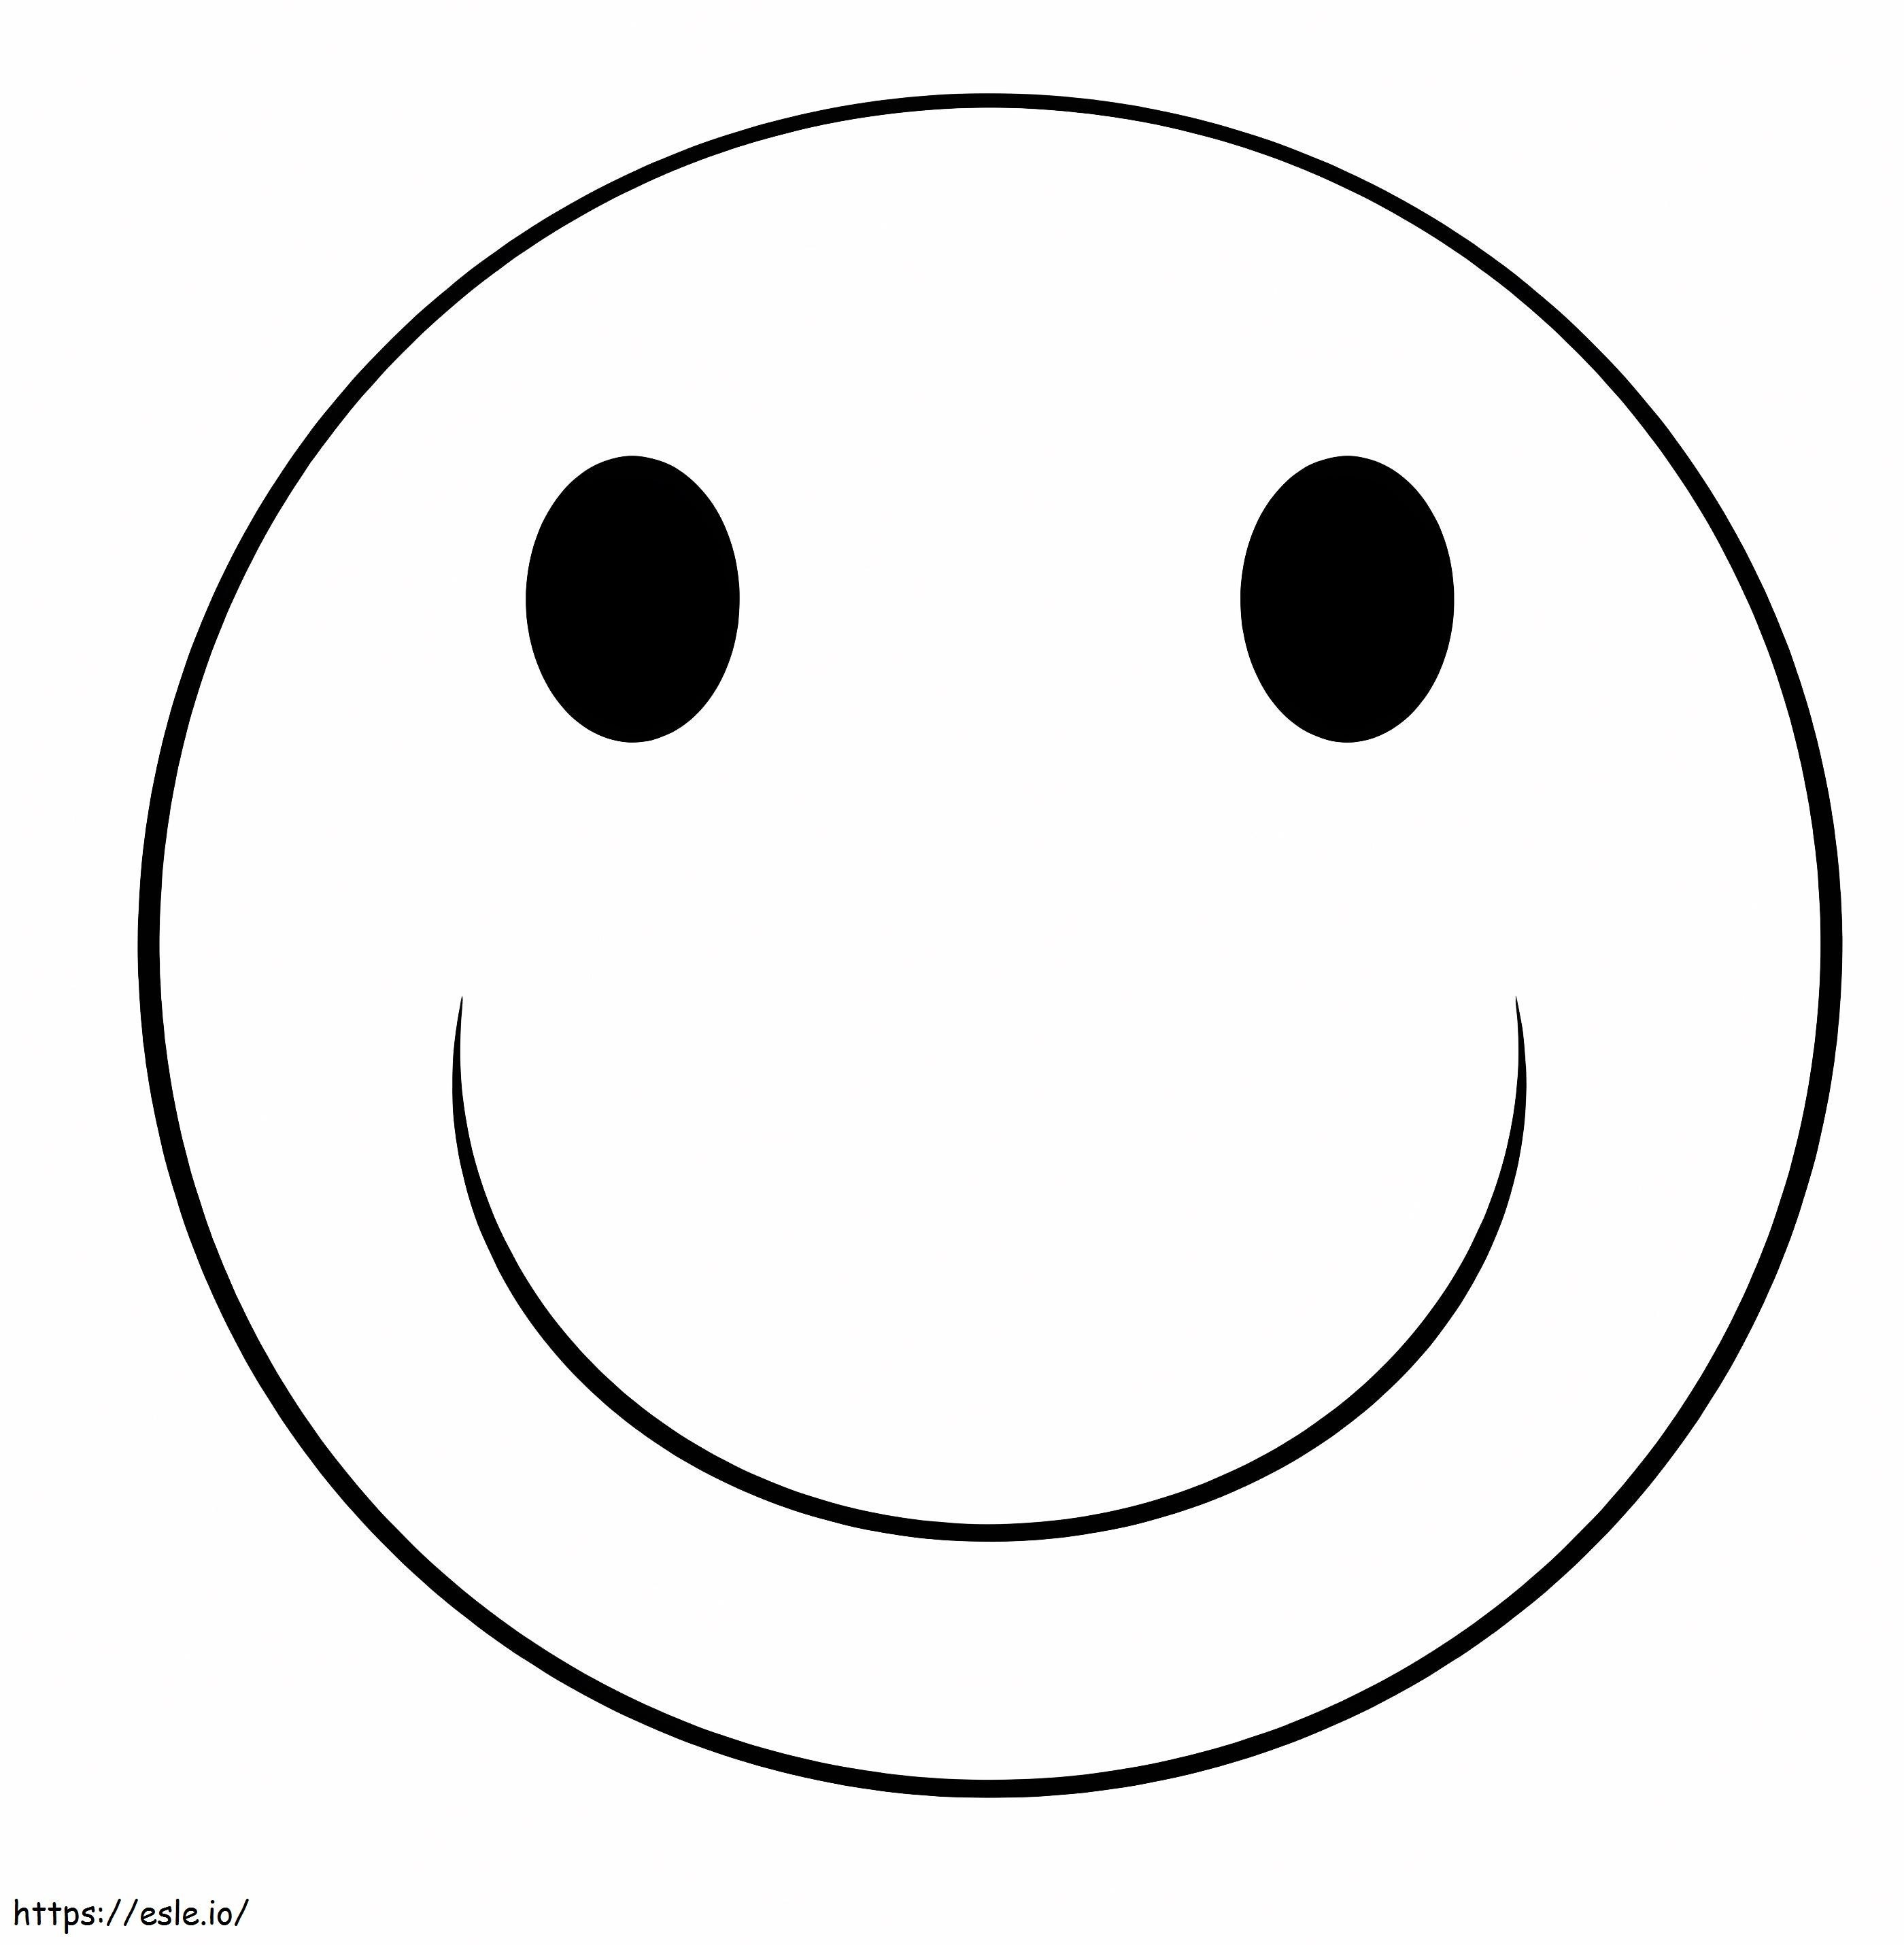 Smiley Face 2 coloring page